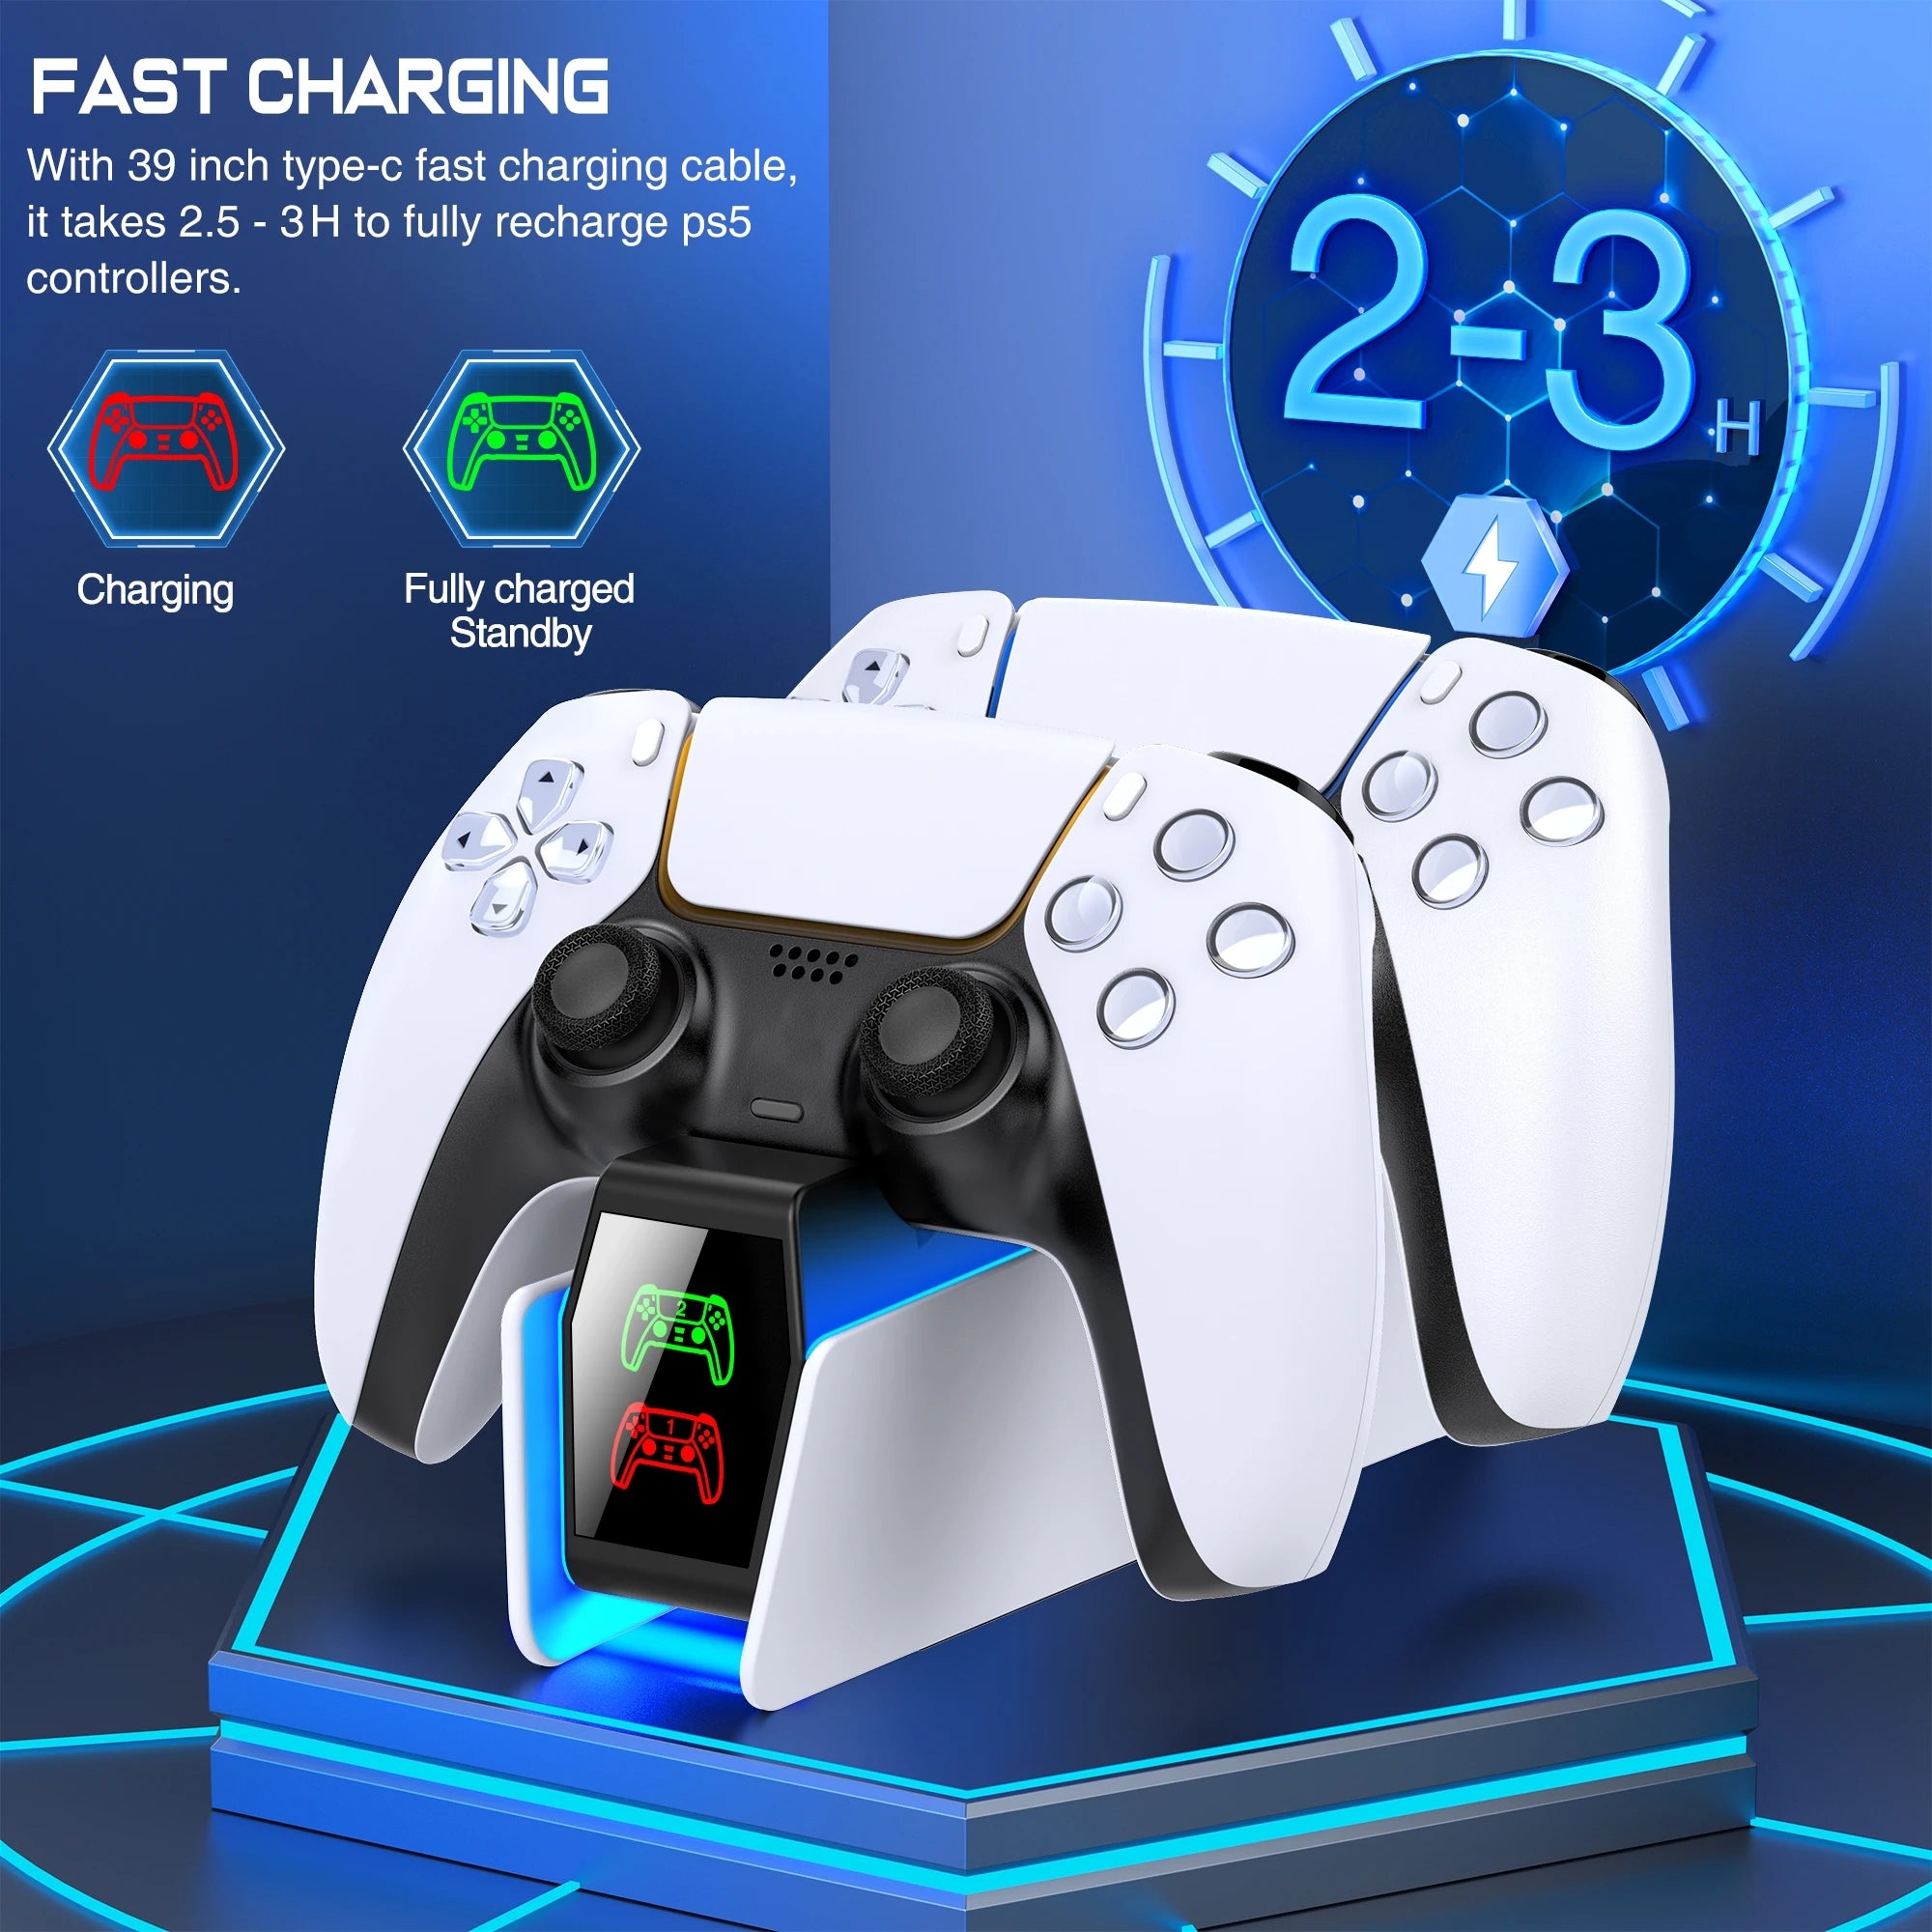 PS5 Dual Fast Charger with RGB Controller Station